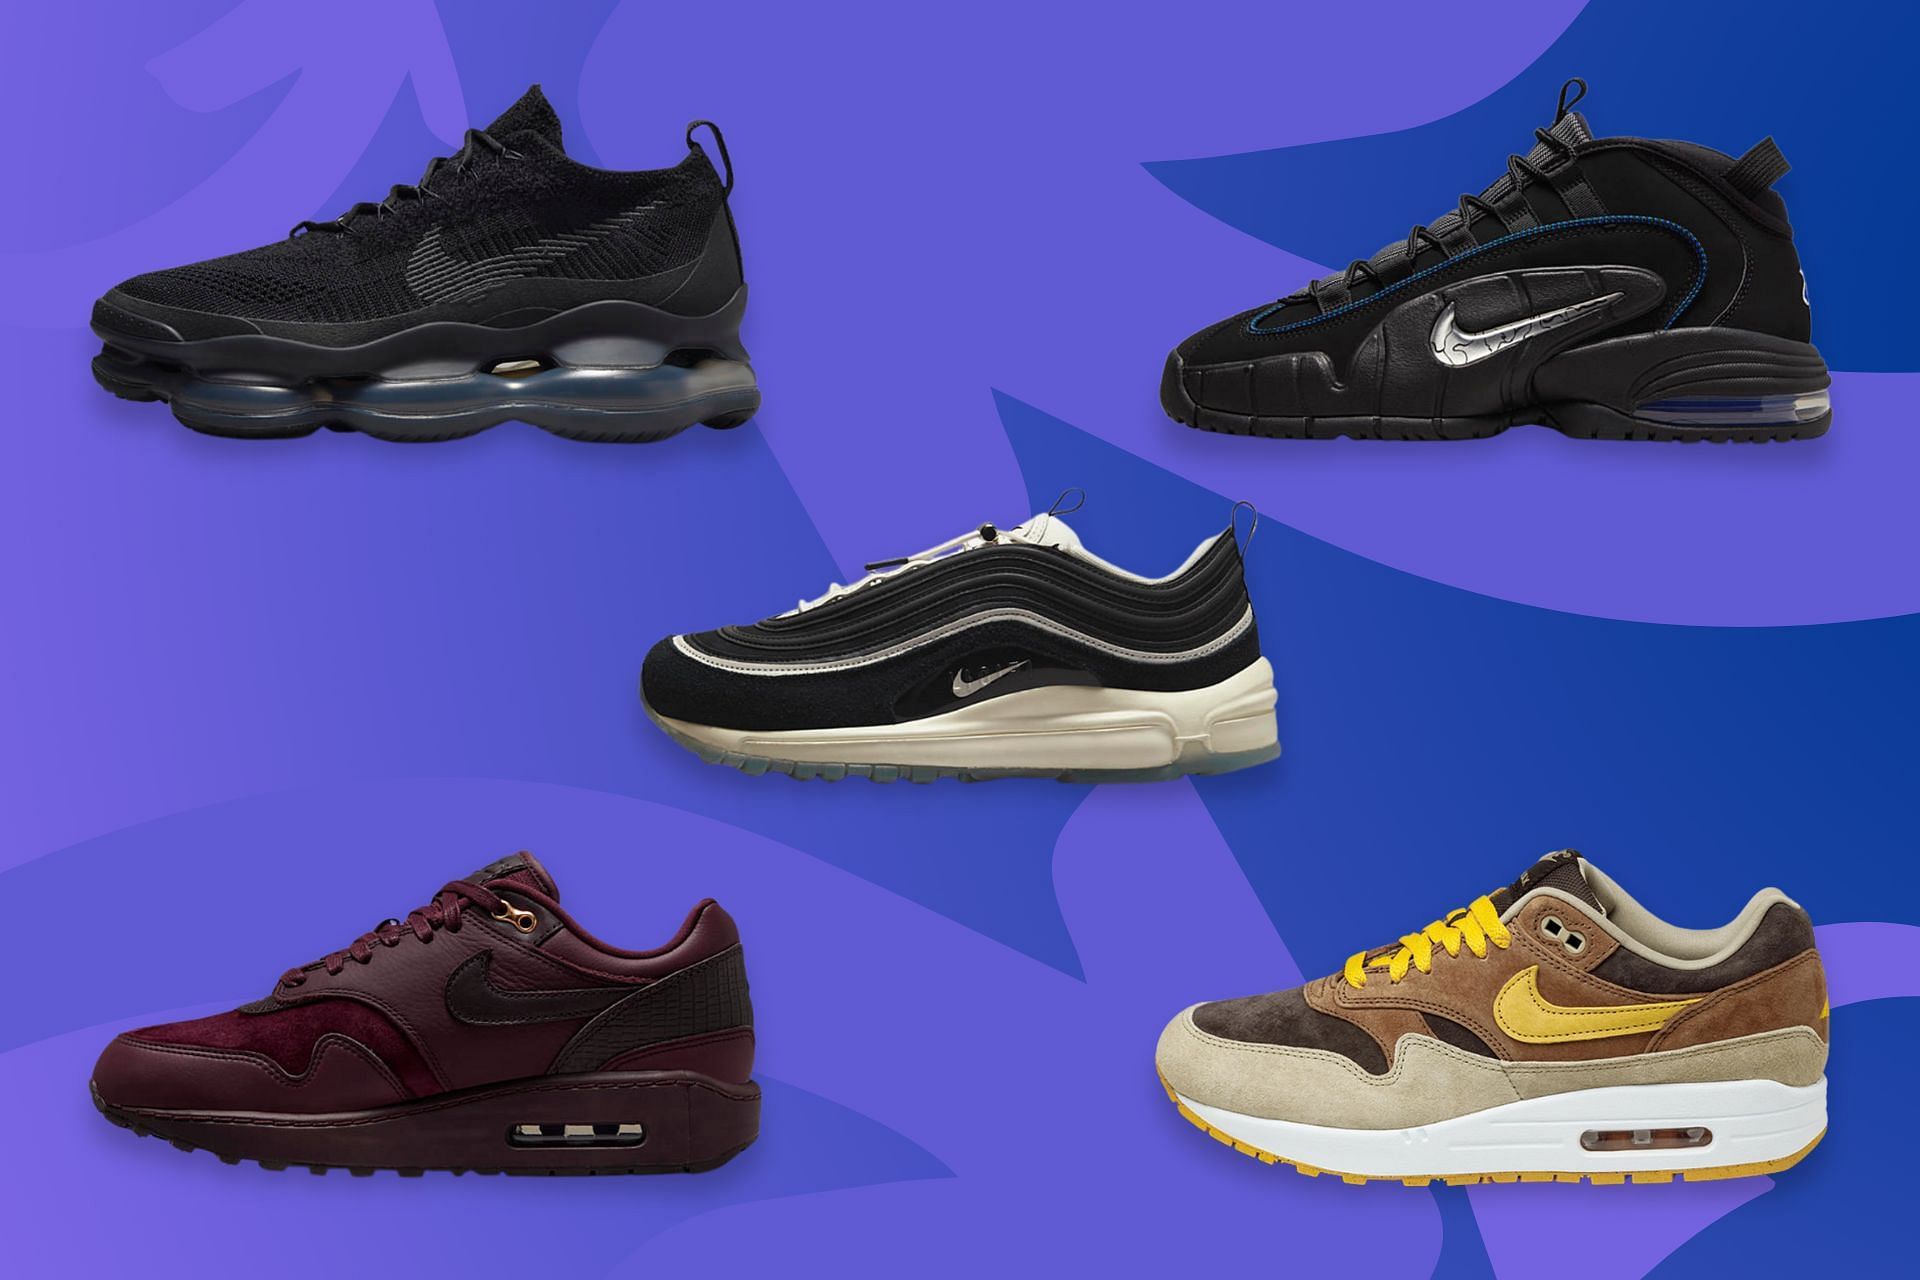 5 upcoming Nike Air Max releases in December 2022